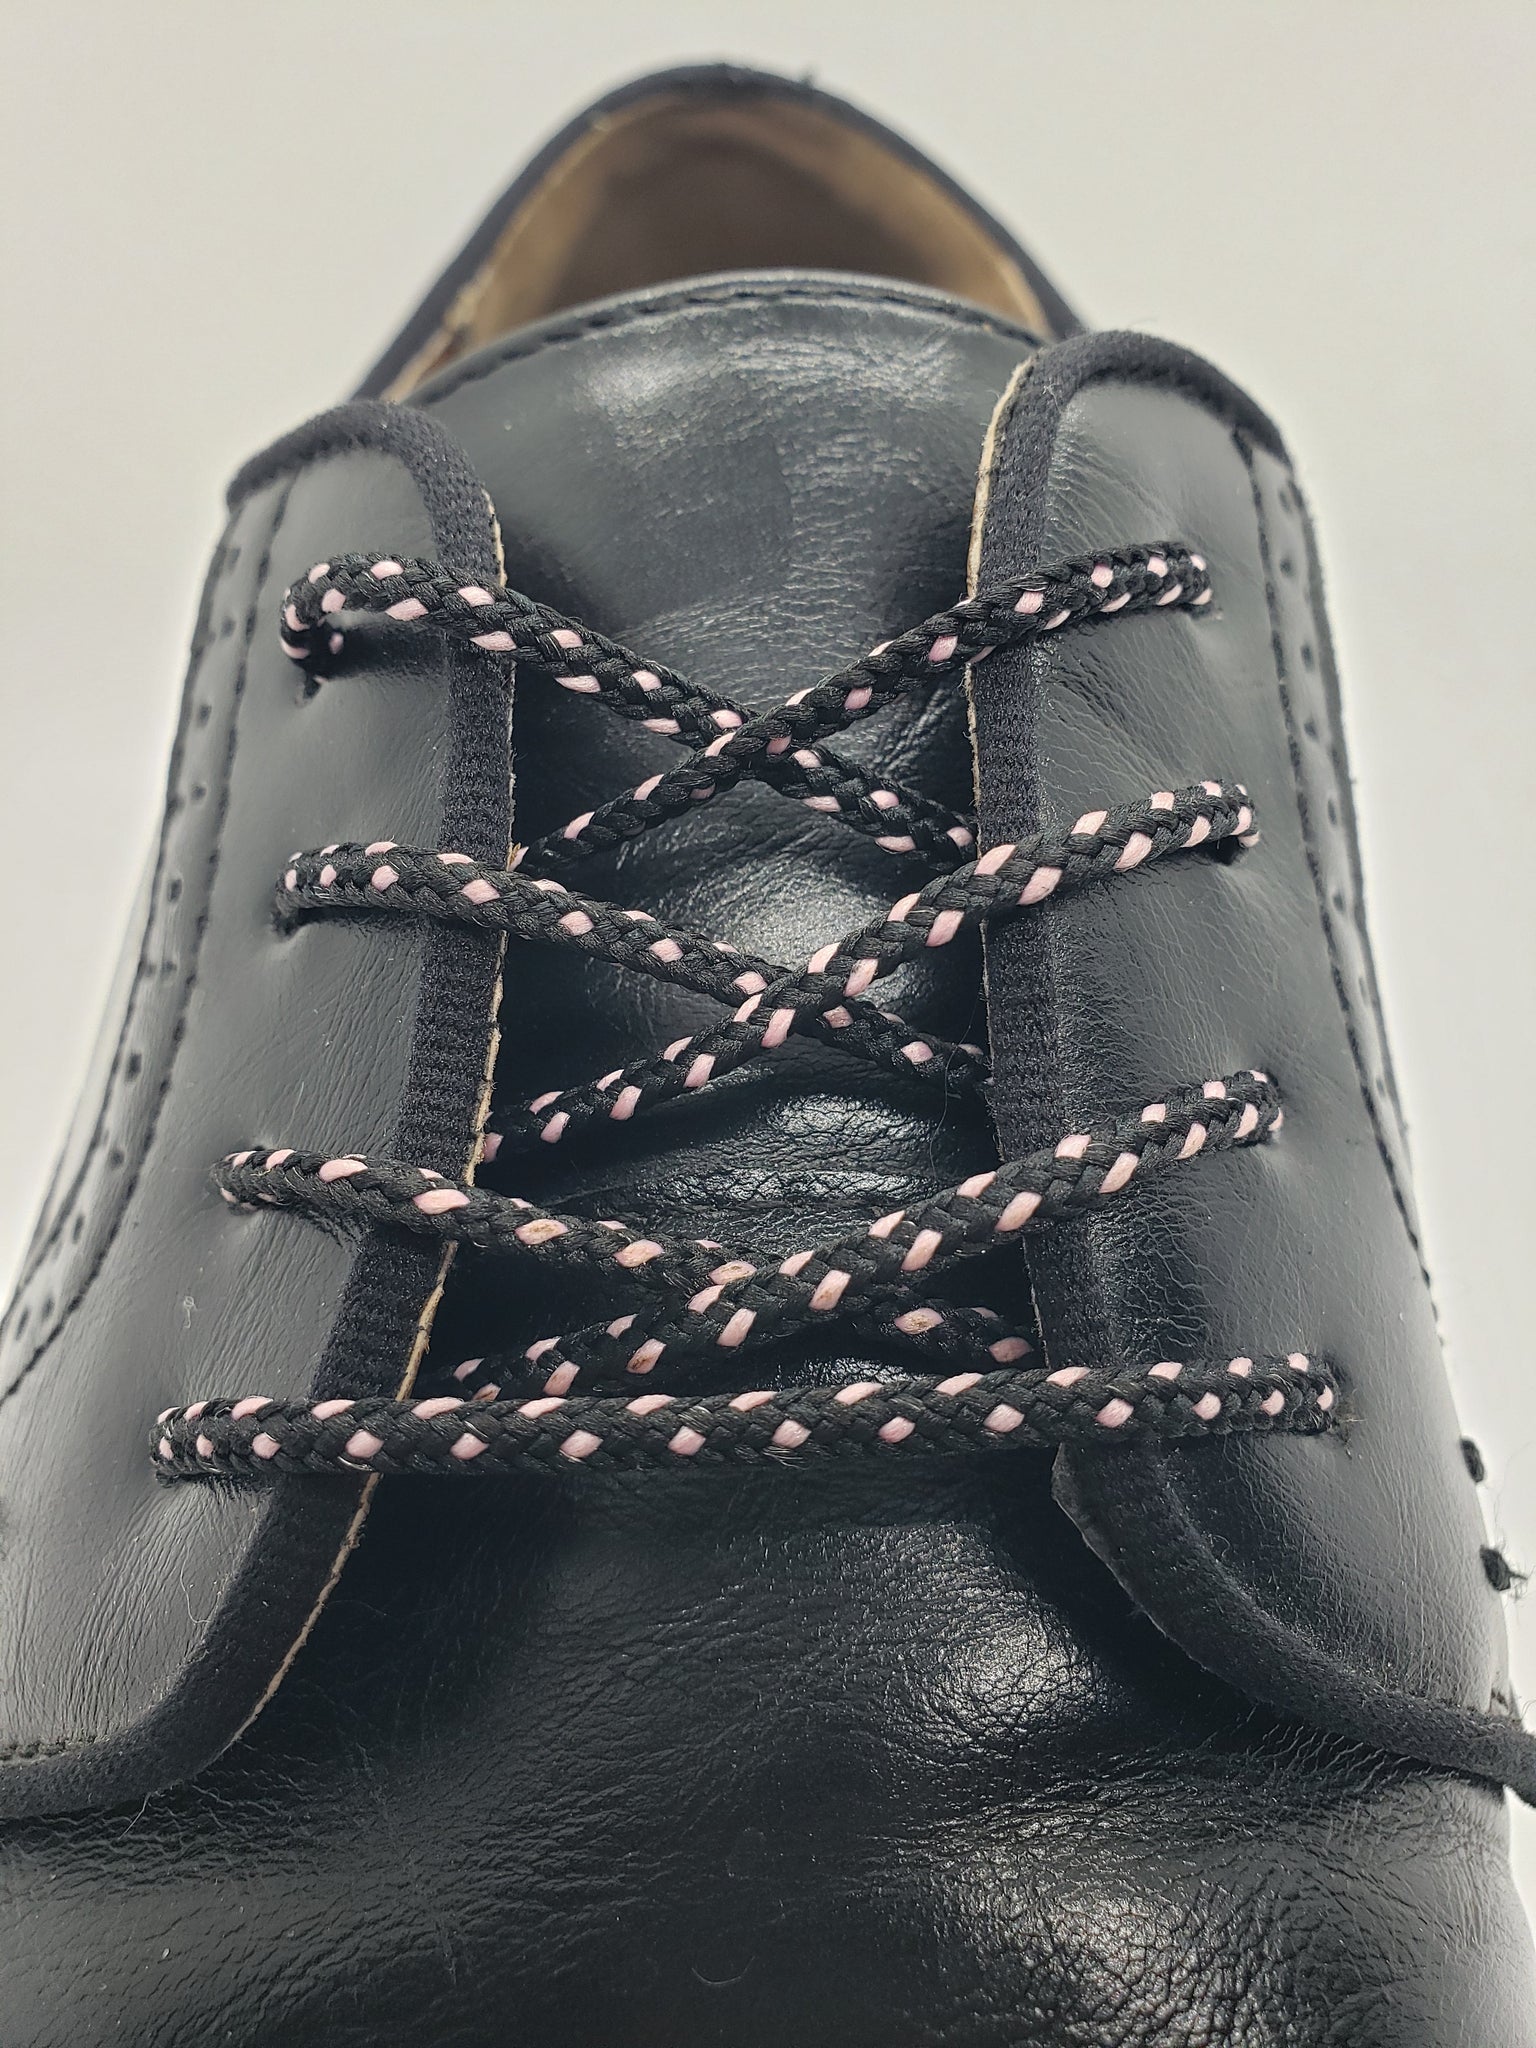 Round Dress Shoelaces - Black with Pink Accents